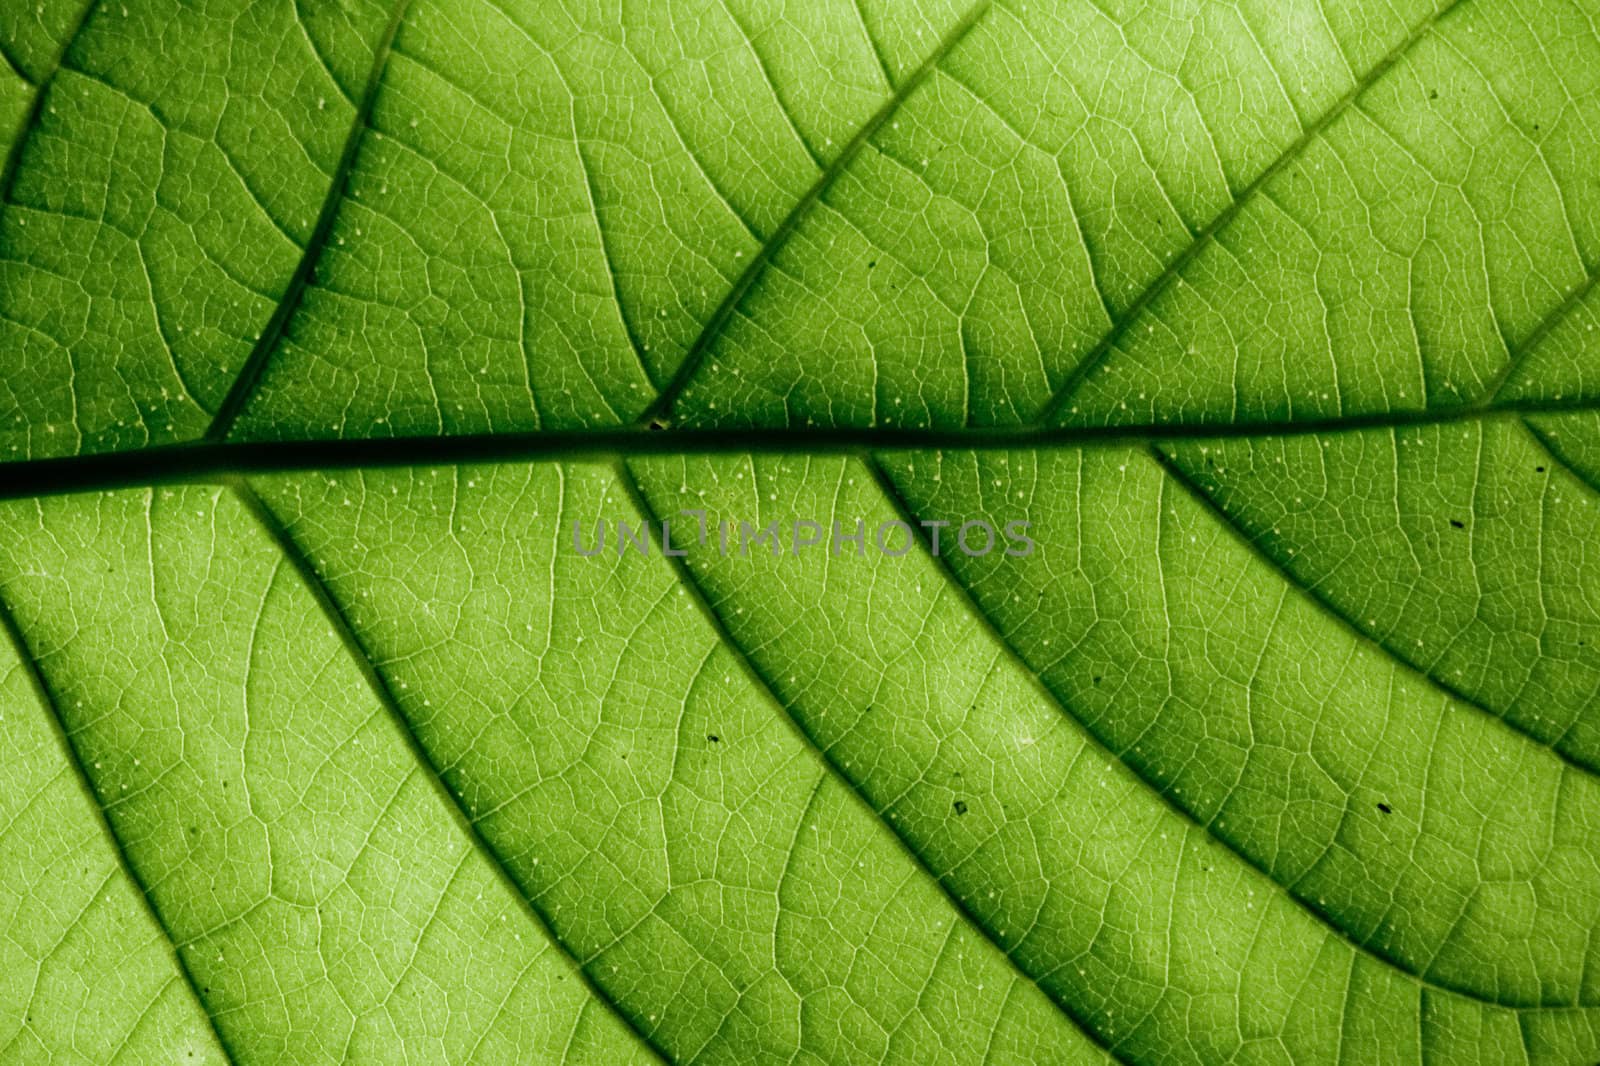 Close-up of green leaf with veins and glands.